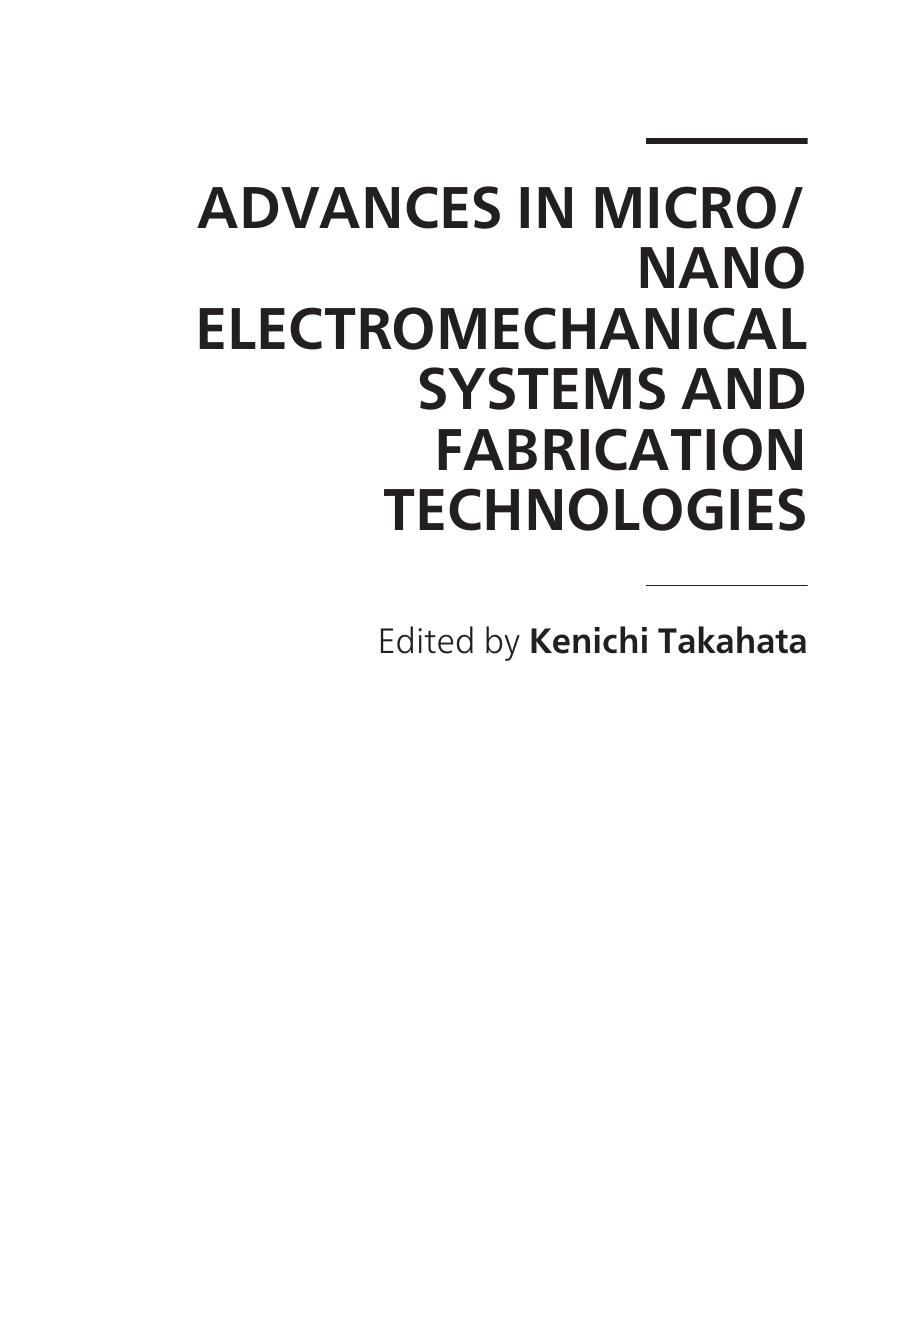 Advances in Micro Nano Electromechanical Systems and Fabrication Technologies 2013.pdf